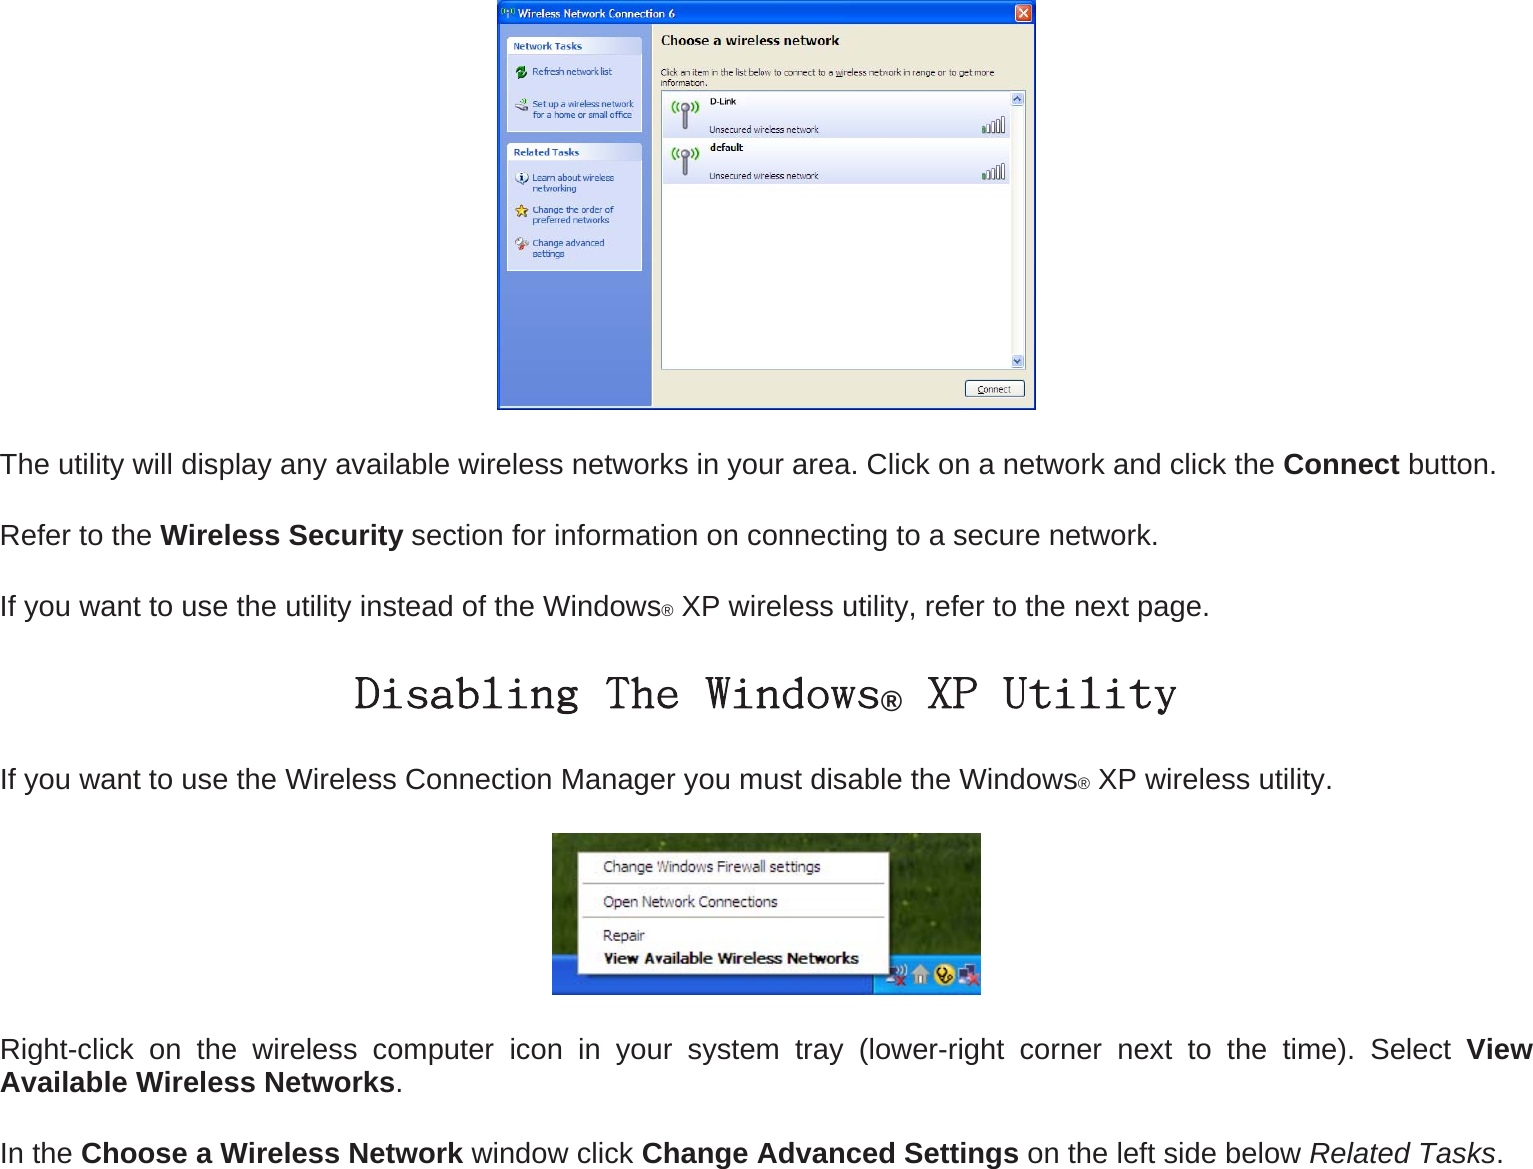  The utility will display any available wireless networks in your area. Click on a network and click the Connect button. Refer to the Wireless Security section for information on connecting to a secure network. If you want to use the utility instead of the Windows® XP wireless utility, refer to the next page. Disabling The Windows® XP Utility If you want to use the Wireless Connection Manager you must disable the Windows® XP wireless utility.  Right-click on the wireless computer icon in your system tray (lower-right corner next to the time). Select View Available Wireless Networks. In the Choose a Wireless Network window click Change Advanced Settings on the left side below Related Tasks.  